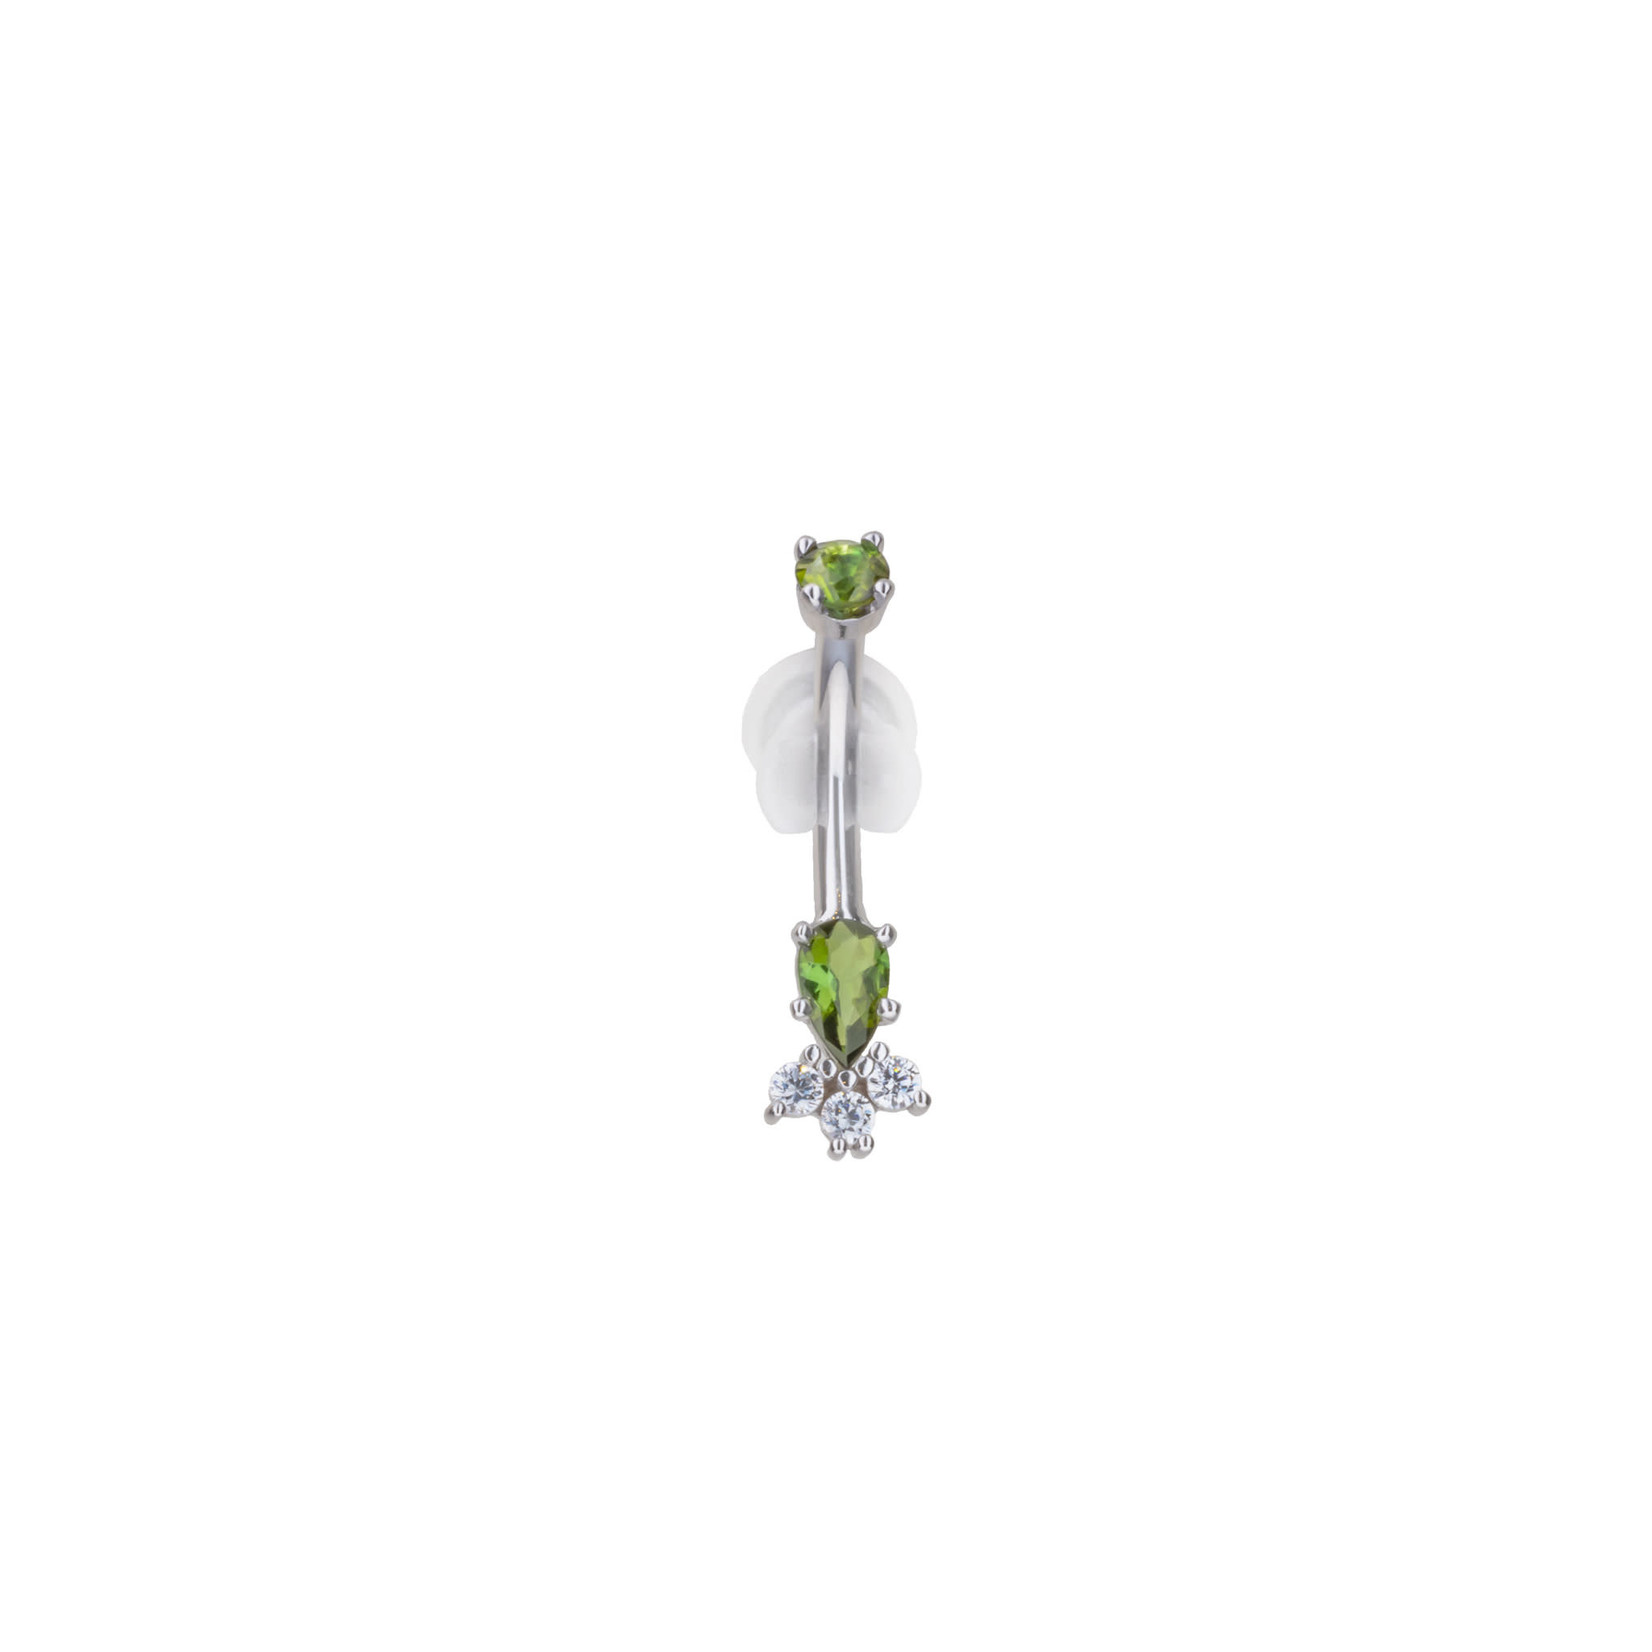 BVLA BVLA 14g 3/8 white gold pear navel curve with 3.0 AA green tourmaline top, 5x3 green tourmaline pear, and 3x 1.75 CZ accents